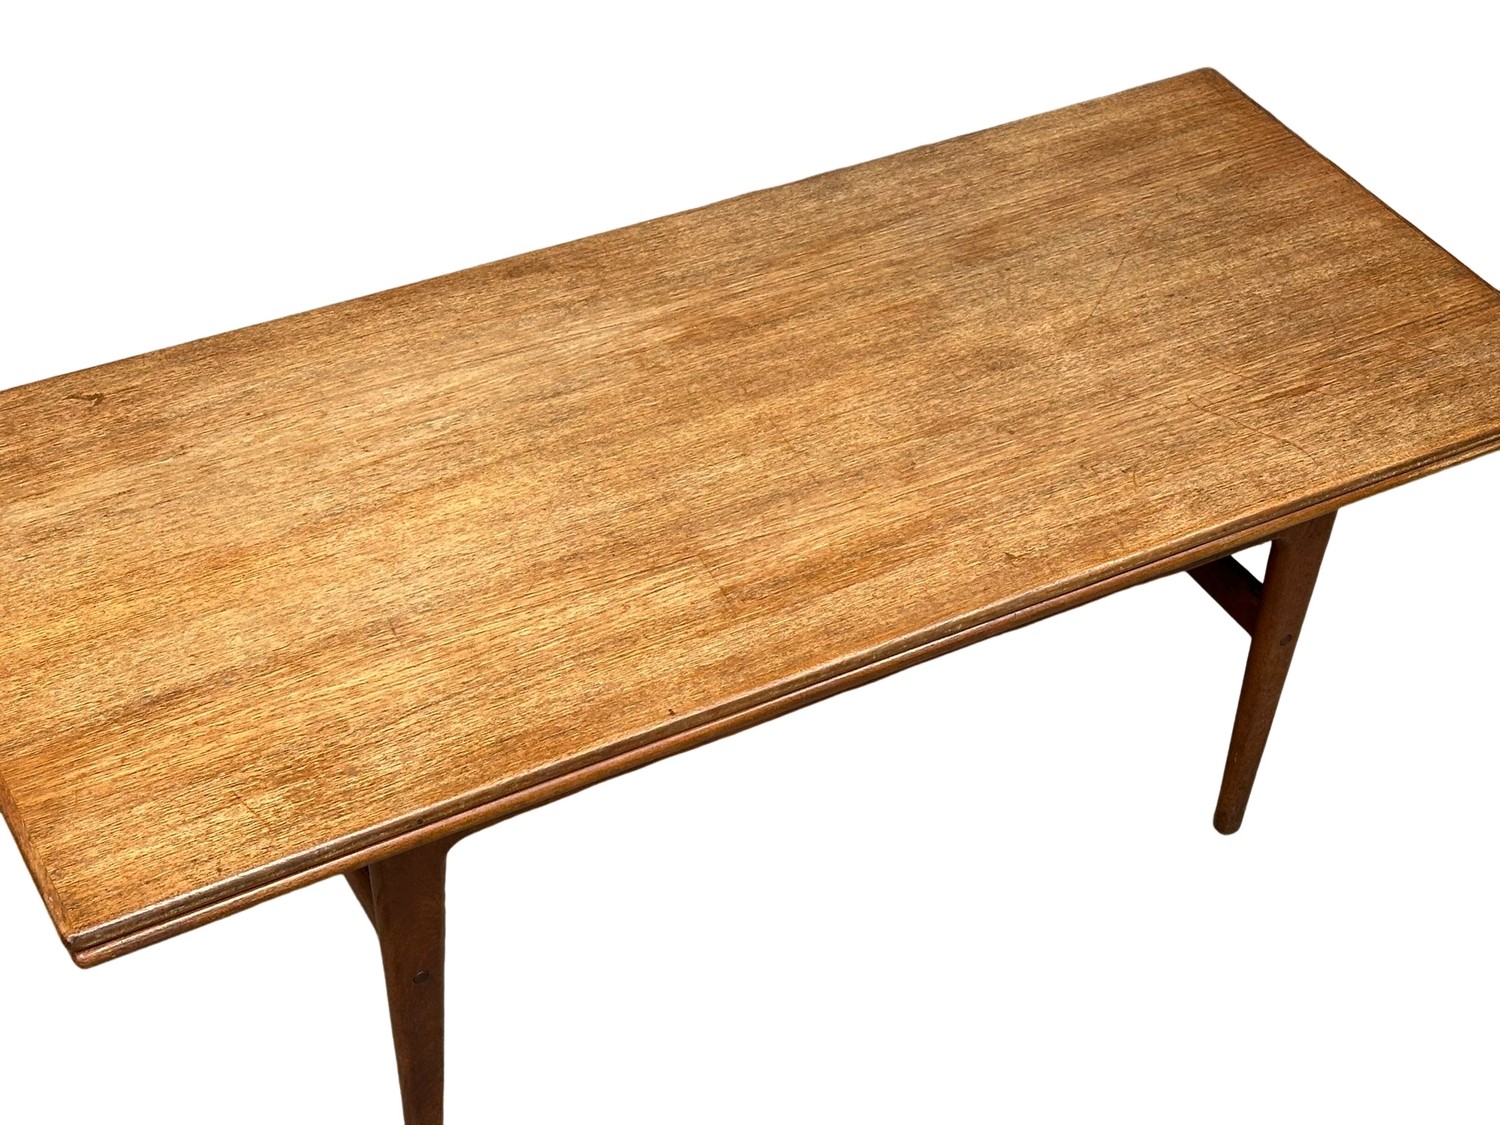 A Danish Mid Century teak ‘Elevator’ table designed by Kai Kristensen. Coffee table/dining table. - Image 2 of 8